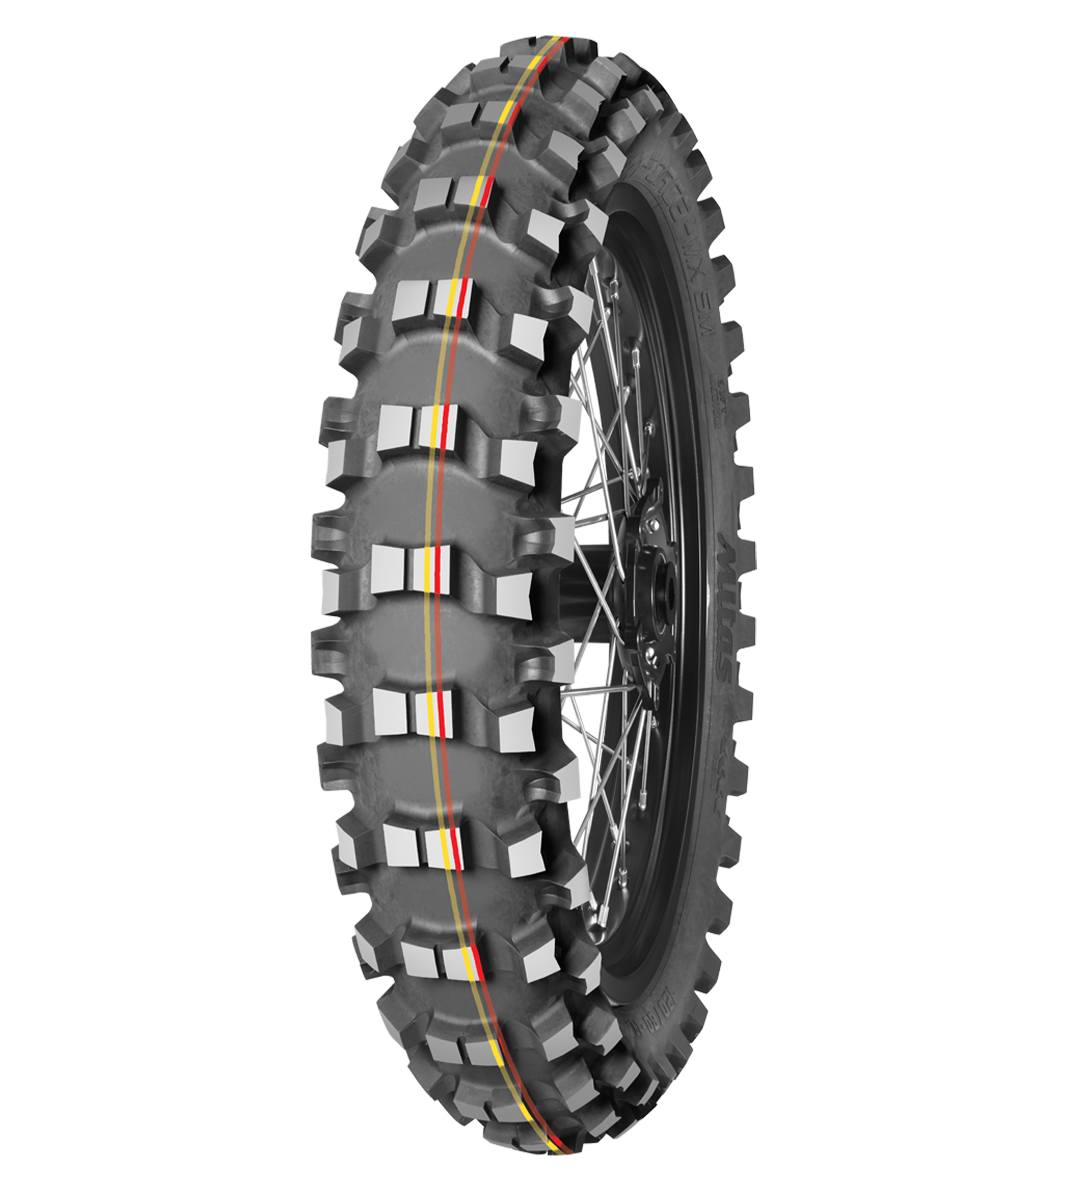 Mitas TERRA FORCE-MX SM 100/90-19 Motocross Competition Off-Road SOFT TO MEDIUM 57M Red &amp; Yellow Tube Rear Tire, 226645, 100/90-19, 100/90-19 (r), Motocross, Motocross Competition, Off-Road, Rear, Terra Force, Terra Force-MX SM, Trail, Tires - Imported and distributed in North &amp; South America by Lindeco Genuine Powersports - Premier Powersports Equipment and Accessories for Motorcycle Enthusiasts, Professional Riders and Dealers.